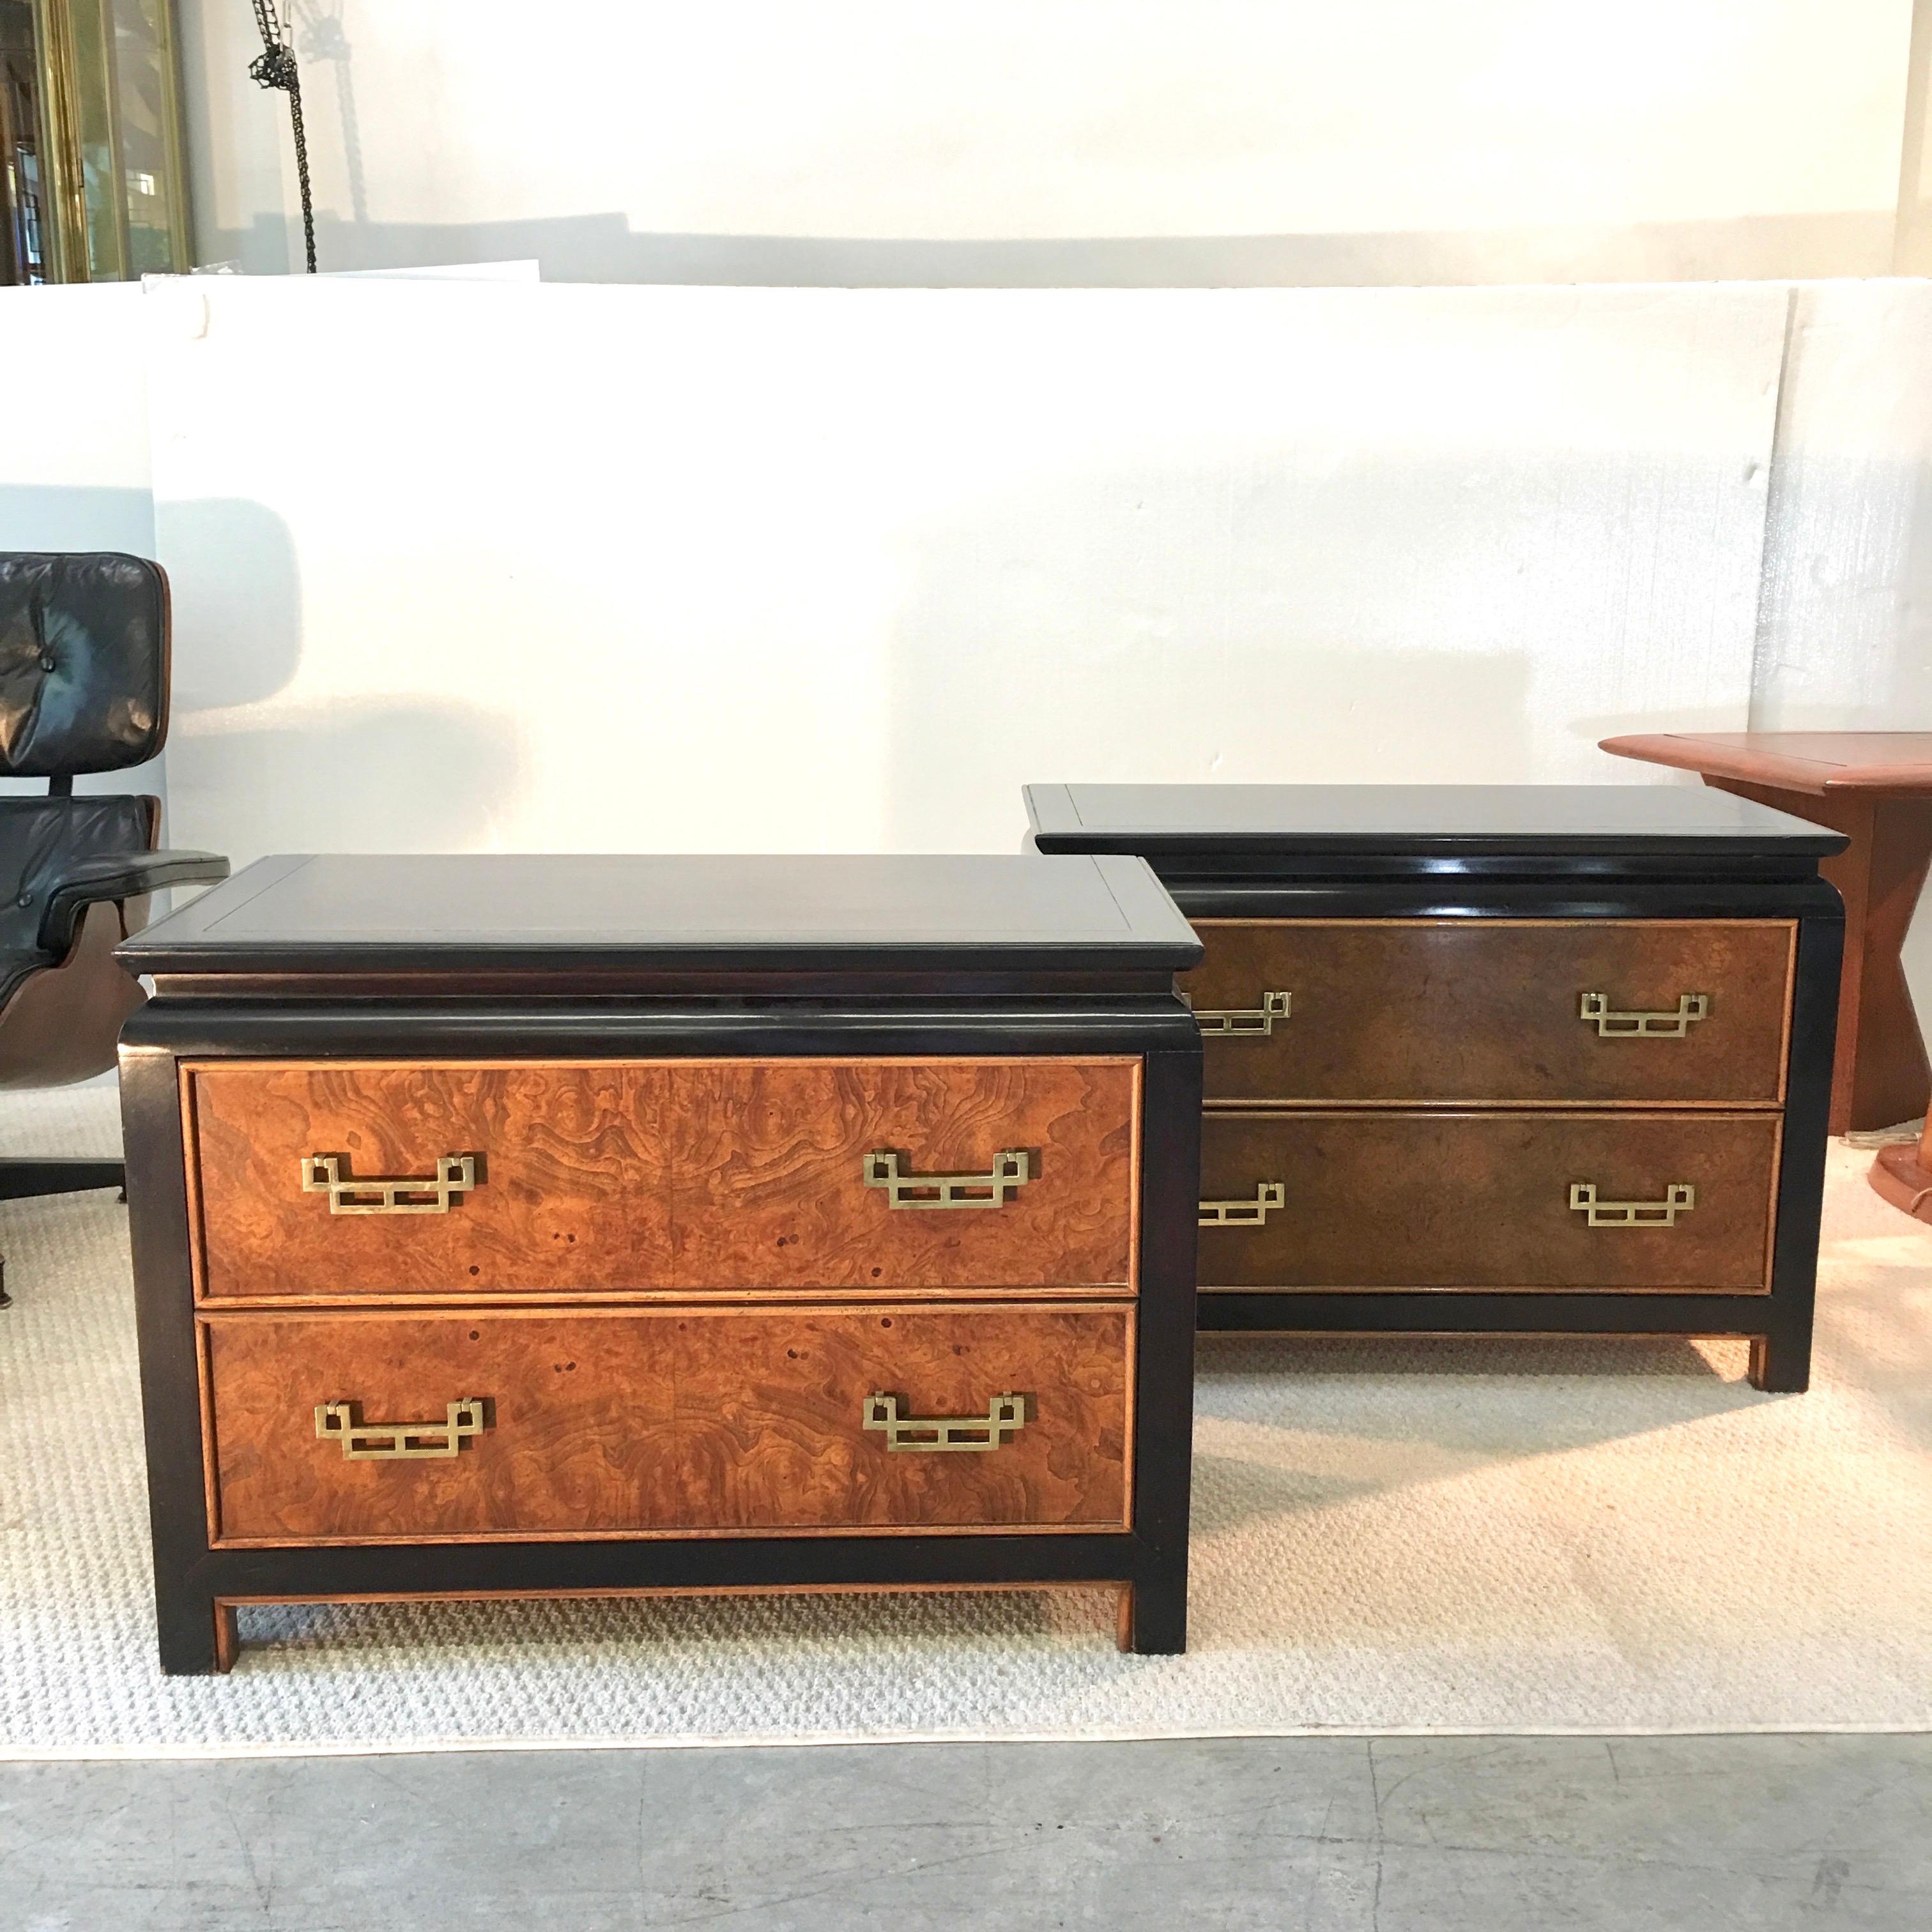 Pair of nightstands from the 1970s Chin Hua collection designed by Raymond Karl Sobota for Century Furniture. Two drawers with distinctive solid brass Asian inspired modernist pulls against burl wood drawer faces and sides on an ebonized case.